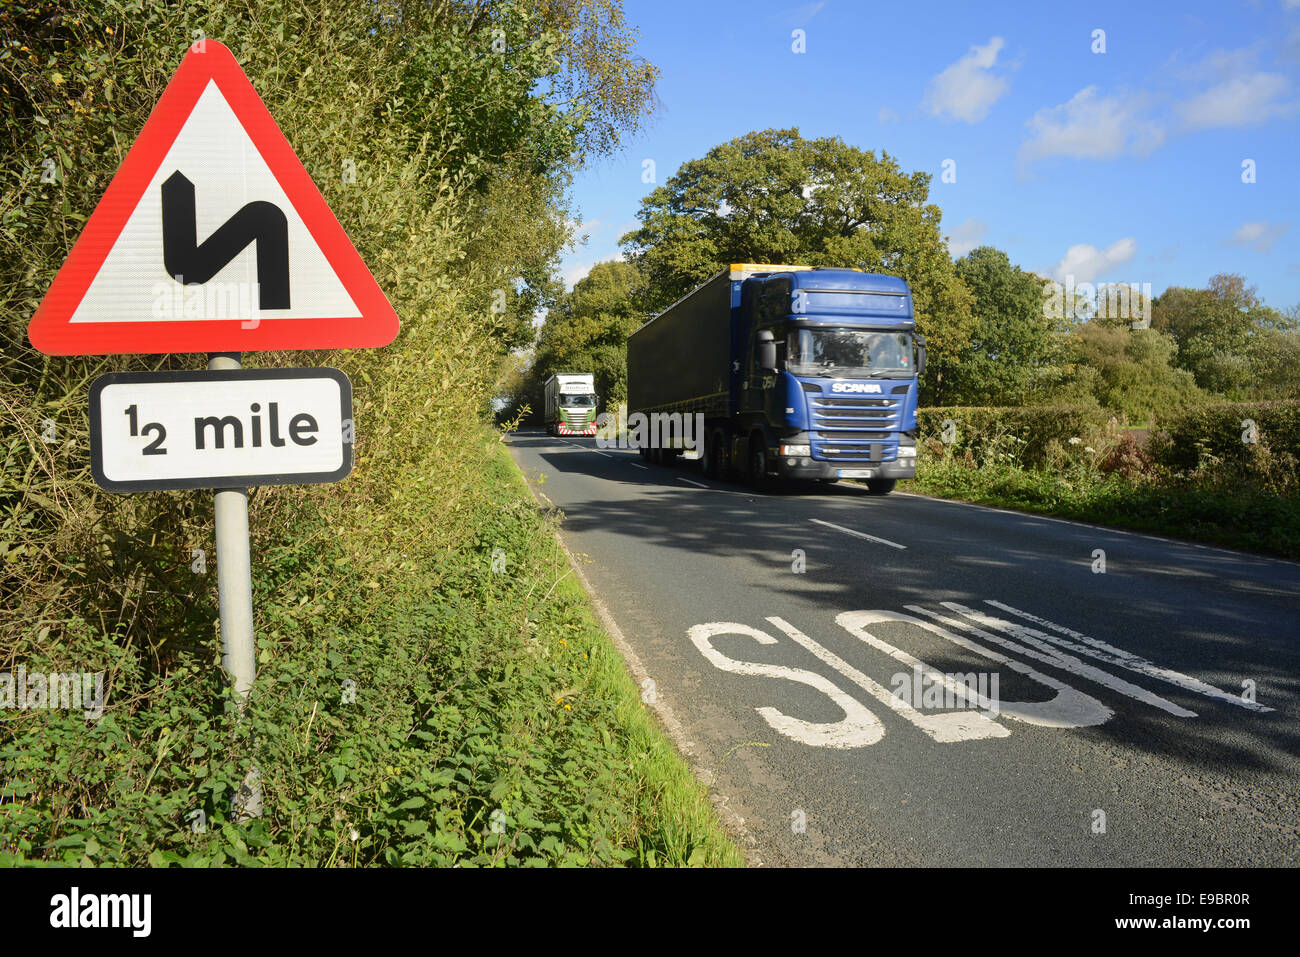 lorry passing sharp bend warning sign for half a mile ahead yorkshire united kingdom Stock Photo